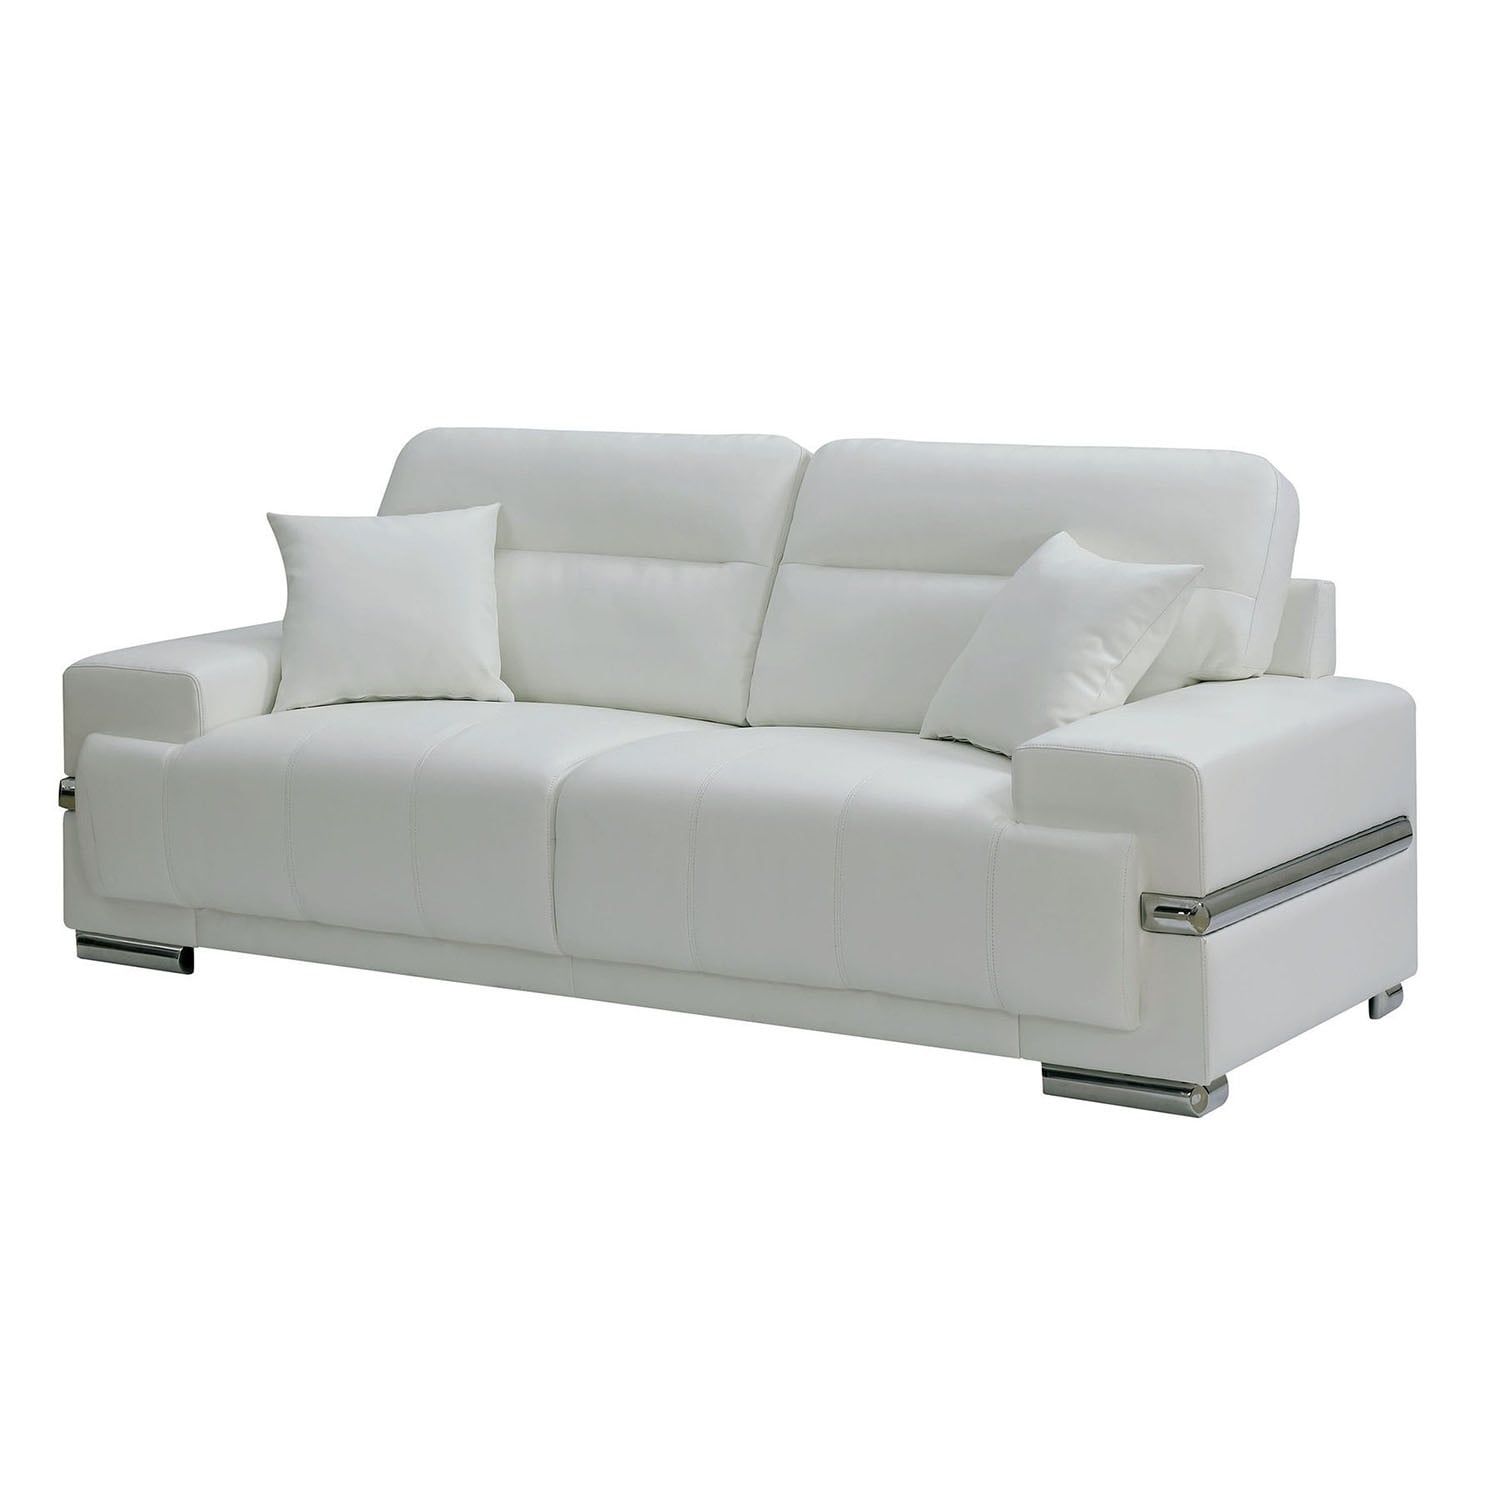 Leatherette Sofa With Metal Legs In White And Chrome Finish – – 34475748 In Chrome Metal Legs Sofas (View 15 of 20)